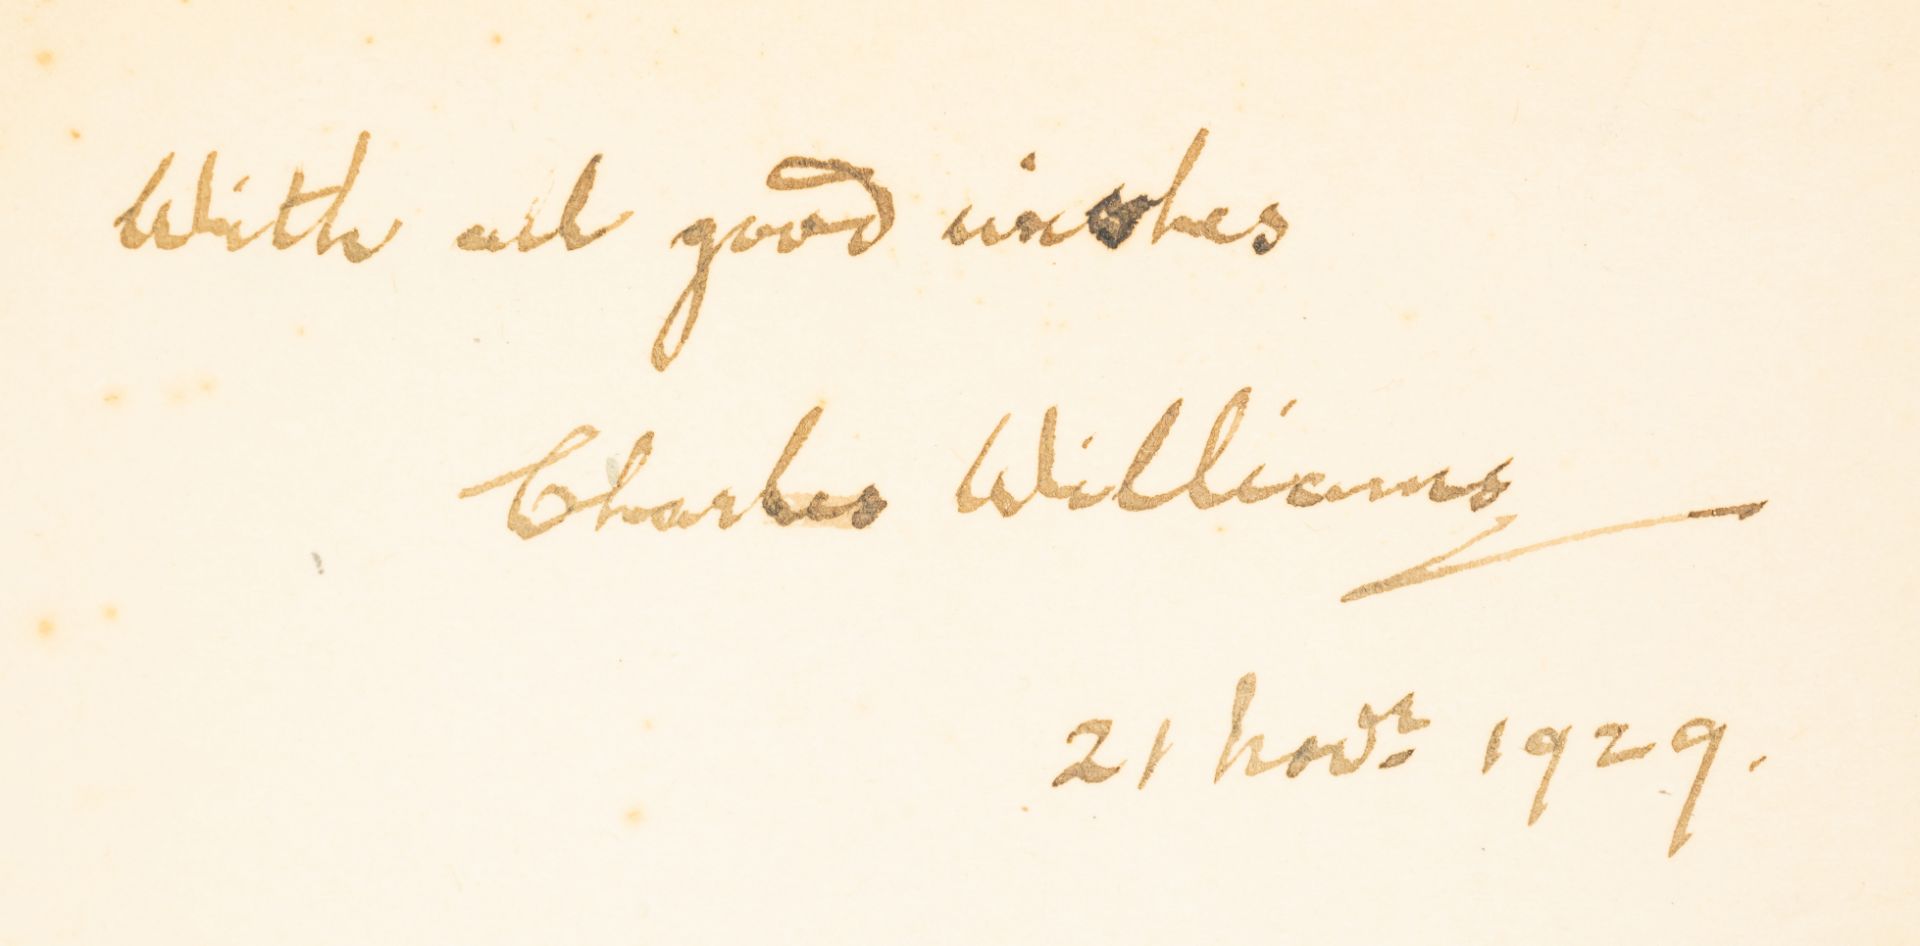 Williams (Charles) A Myth of Shakespeare, first edition, signed by the author, 1928. - Bild 2 aus 2